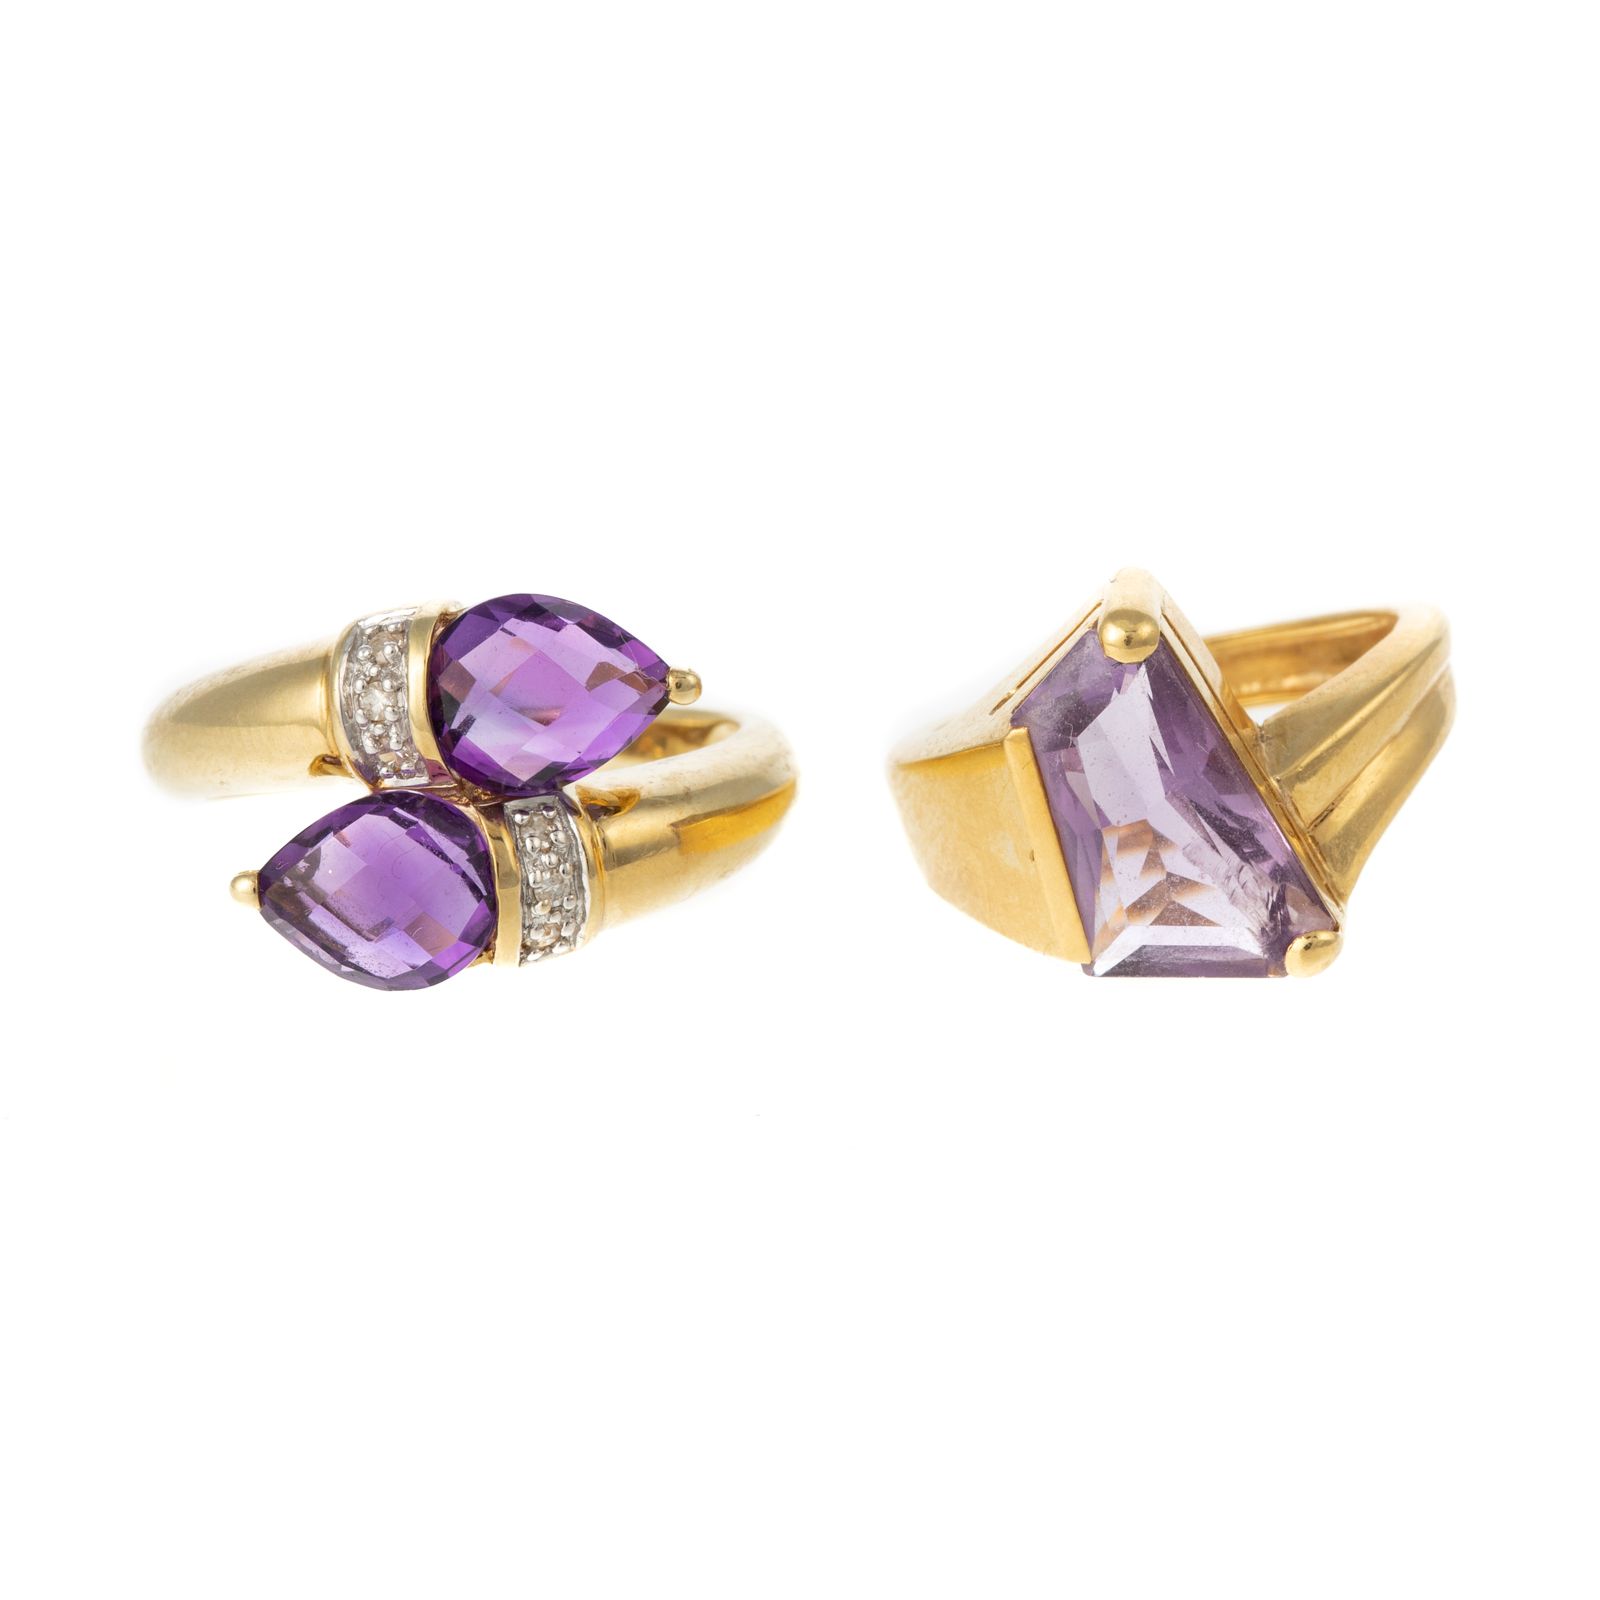 TWO CONTEMPORARY AMETHYST RINGS 3386a2